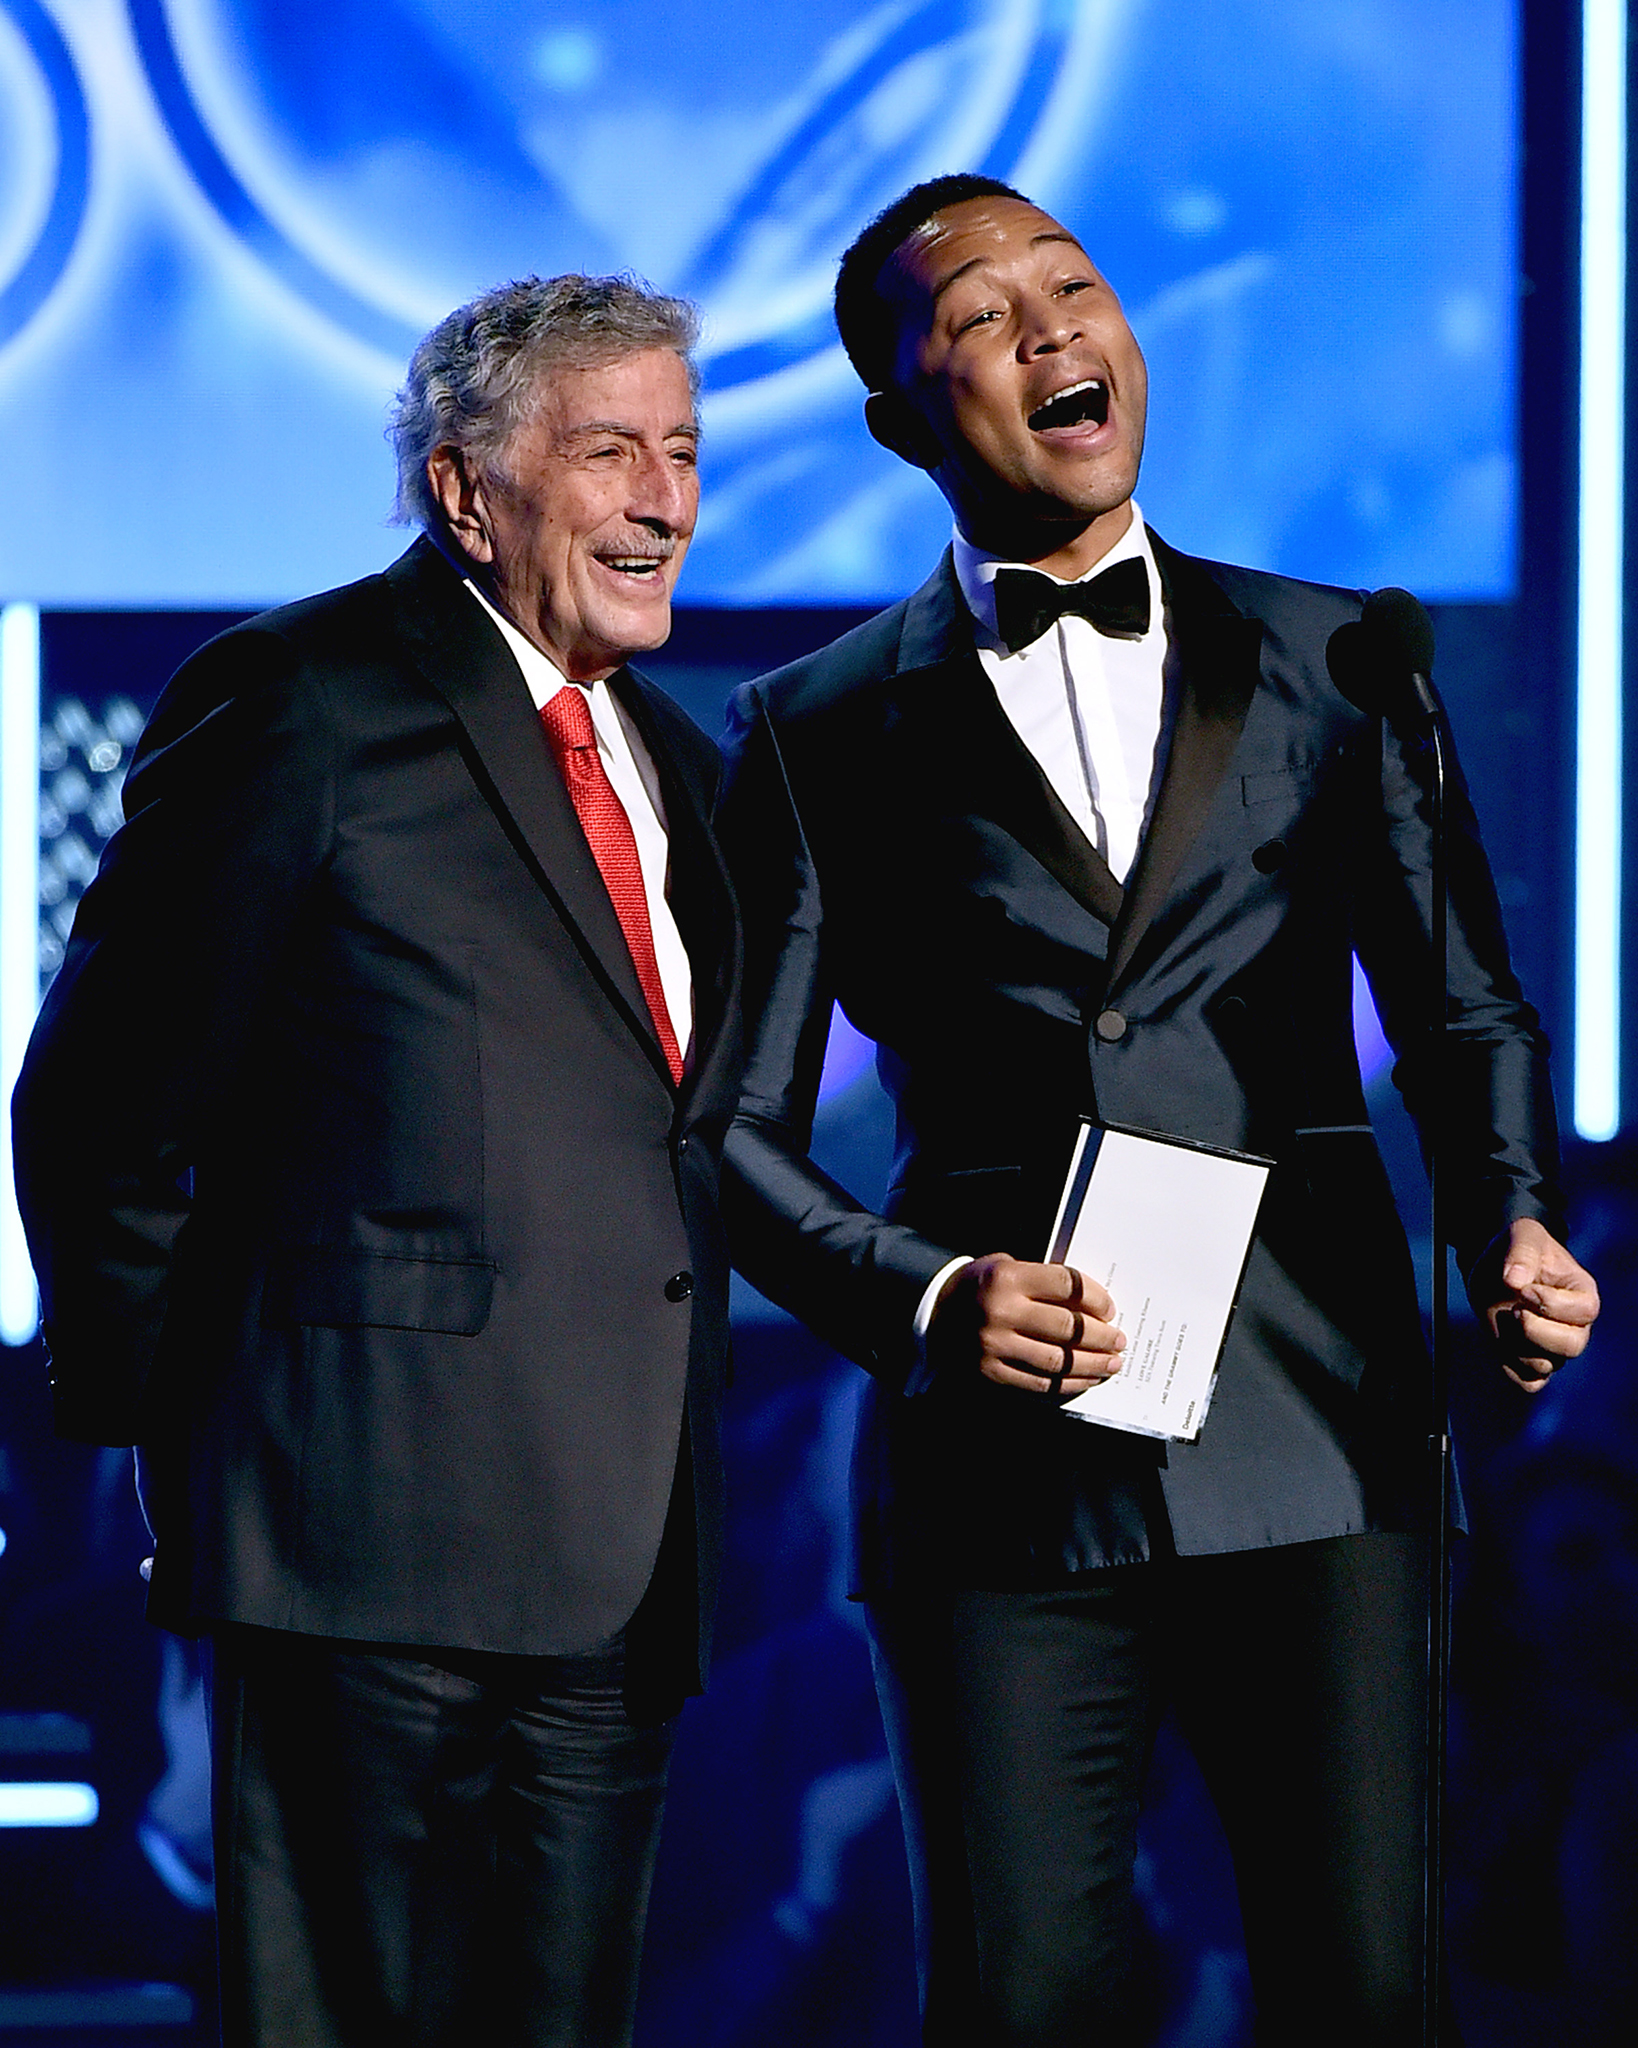 Recording artists Tony Bennett and John Legend speak onstage during the 60th Annual Grammy Awards at Madison Square Garden on Jan.28, 2018 in New York City.